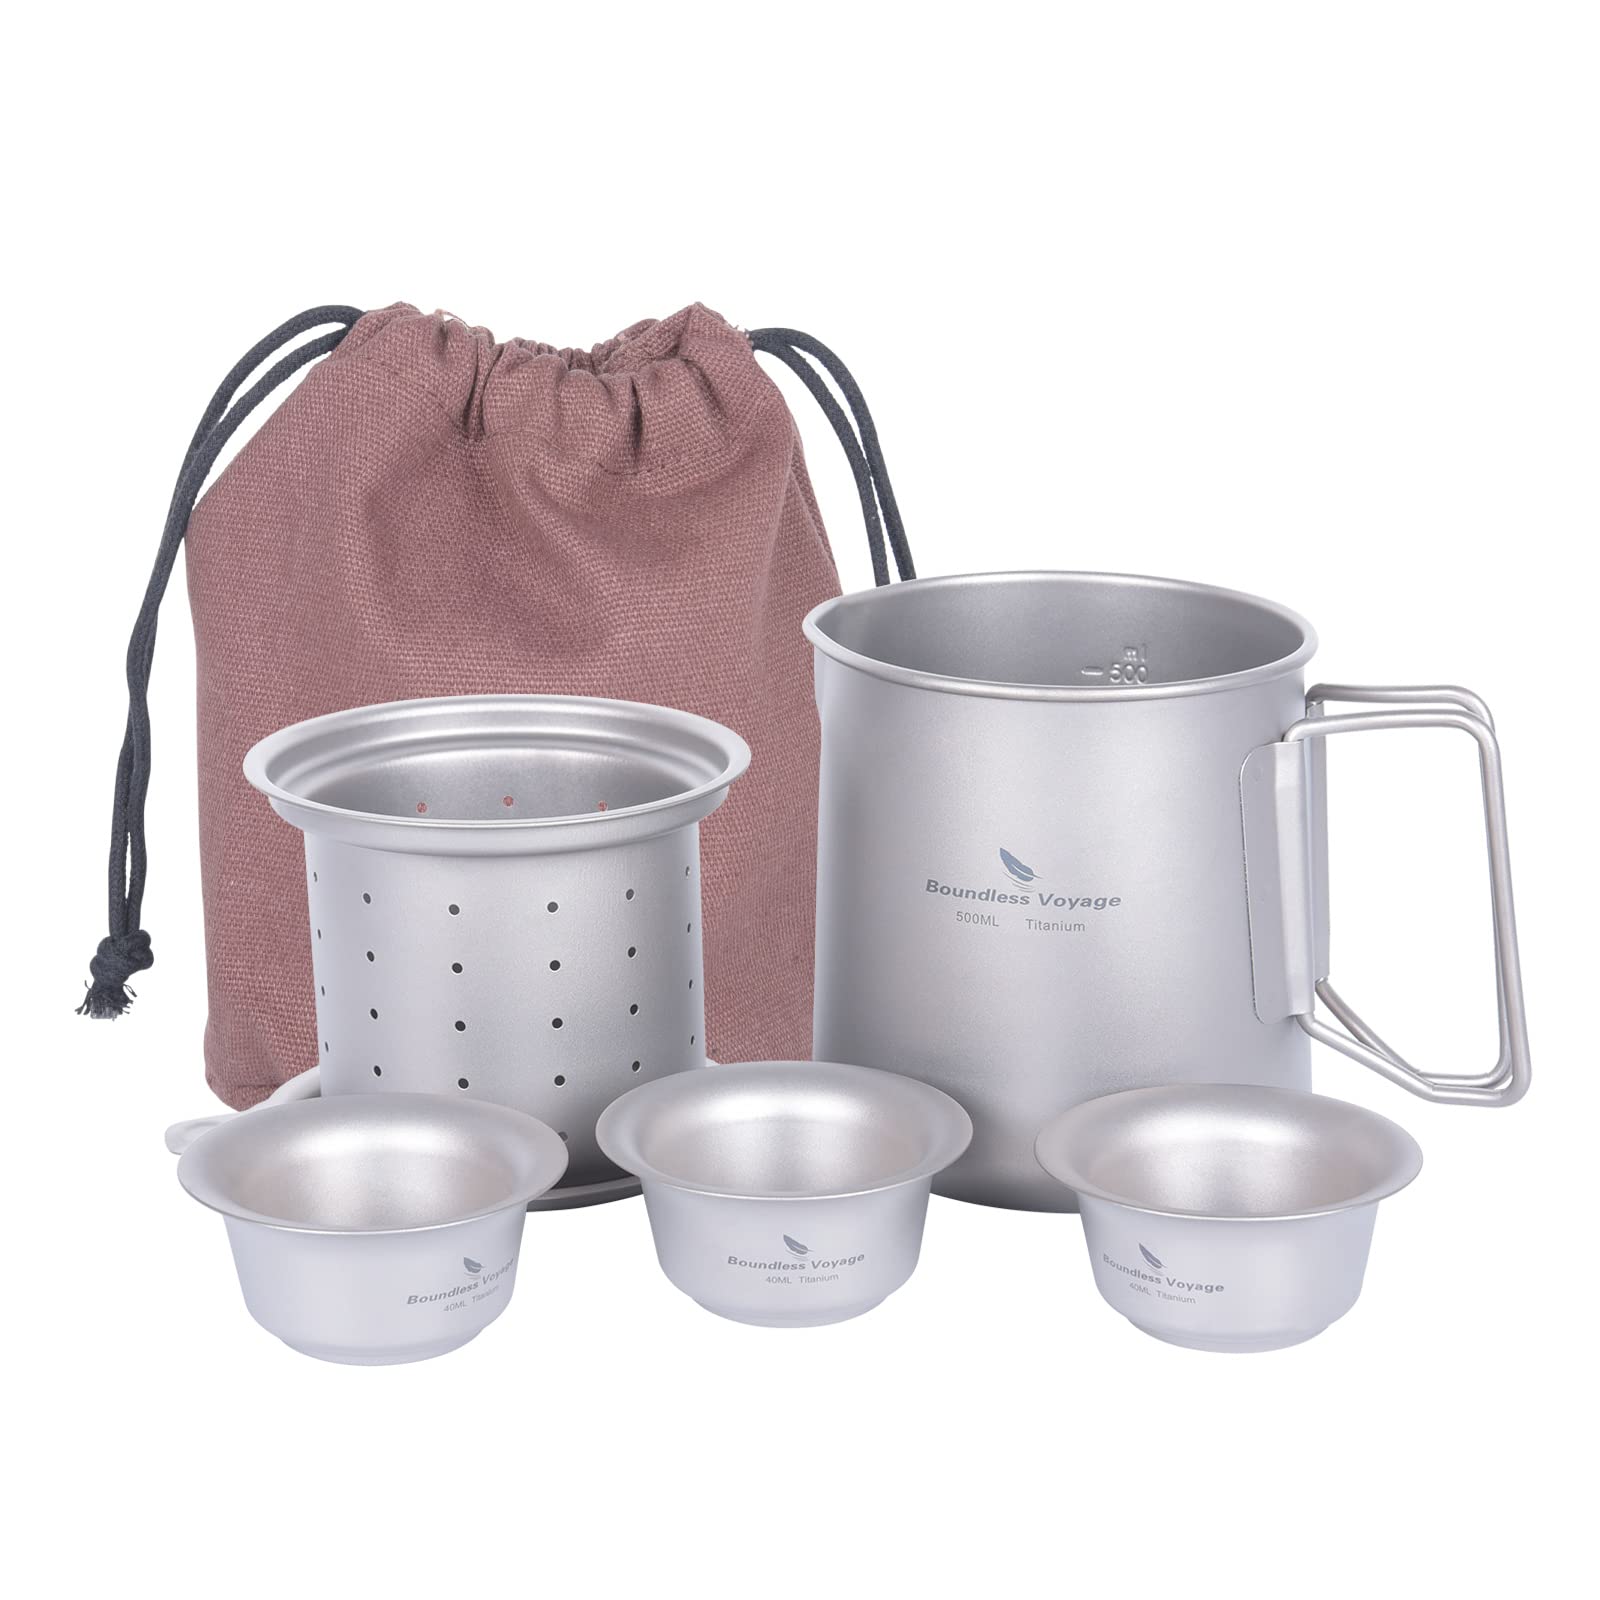 iBasingo 500ml Titanium Cup Set with 3 Small Teacups Lightweight Coffee Tea Mug Portable Easy to Store for Camping Home Caf